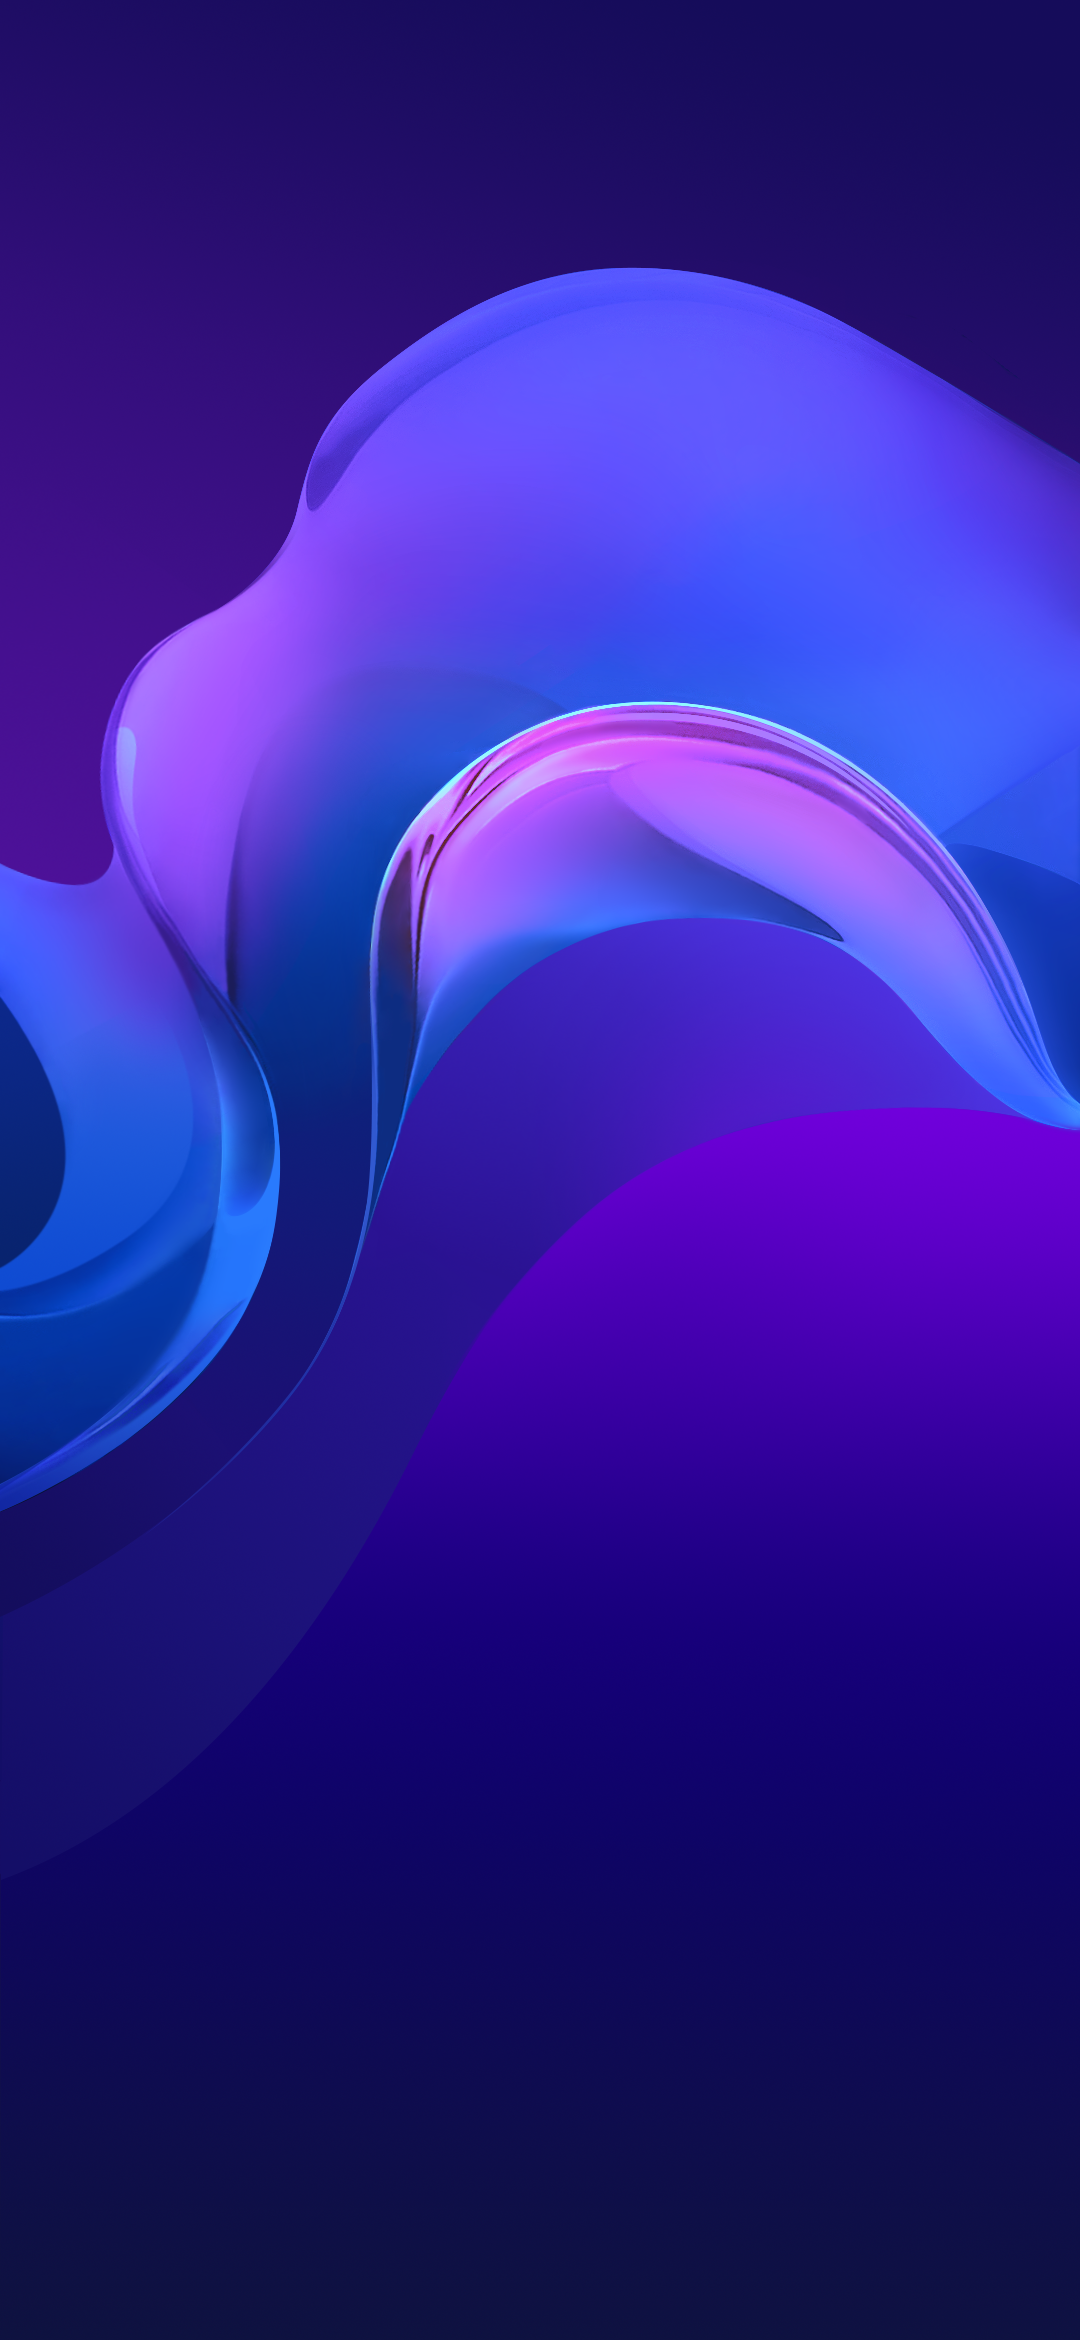 HUAWEI Community. [Wallpaper] Abstract Wallpaper Collection -1